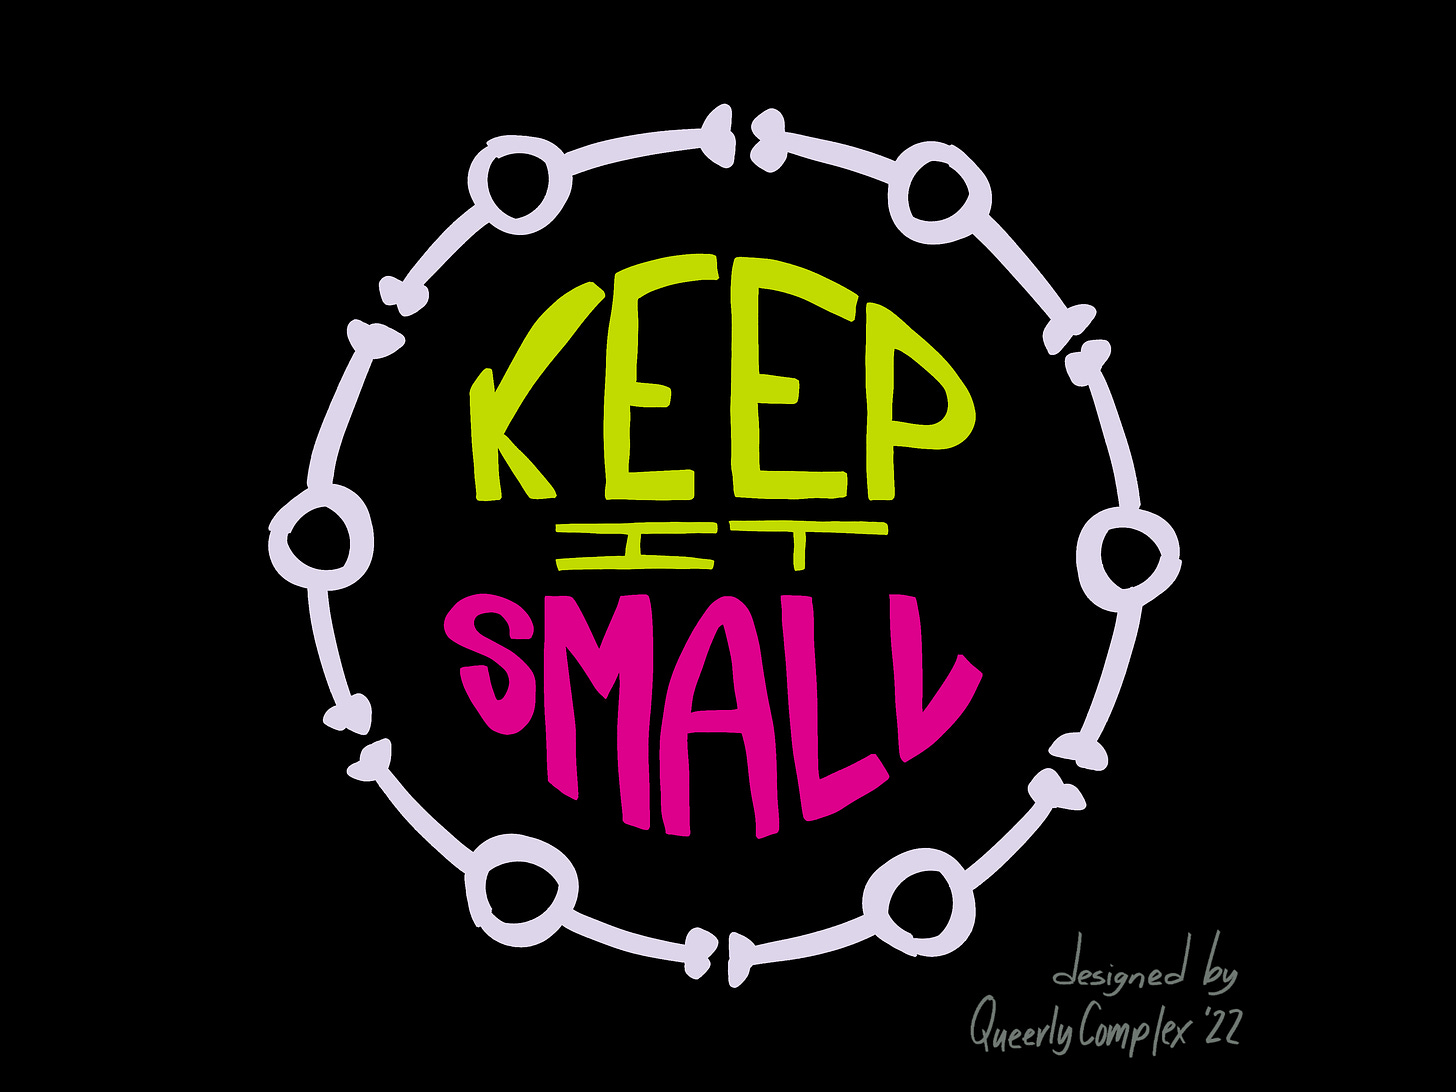 "Keep it small" in hand lettering with a image representing six people with their arms outstreached holding hands in a circle. Designed by Queerly Complex.